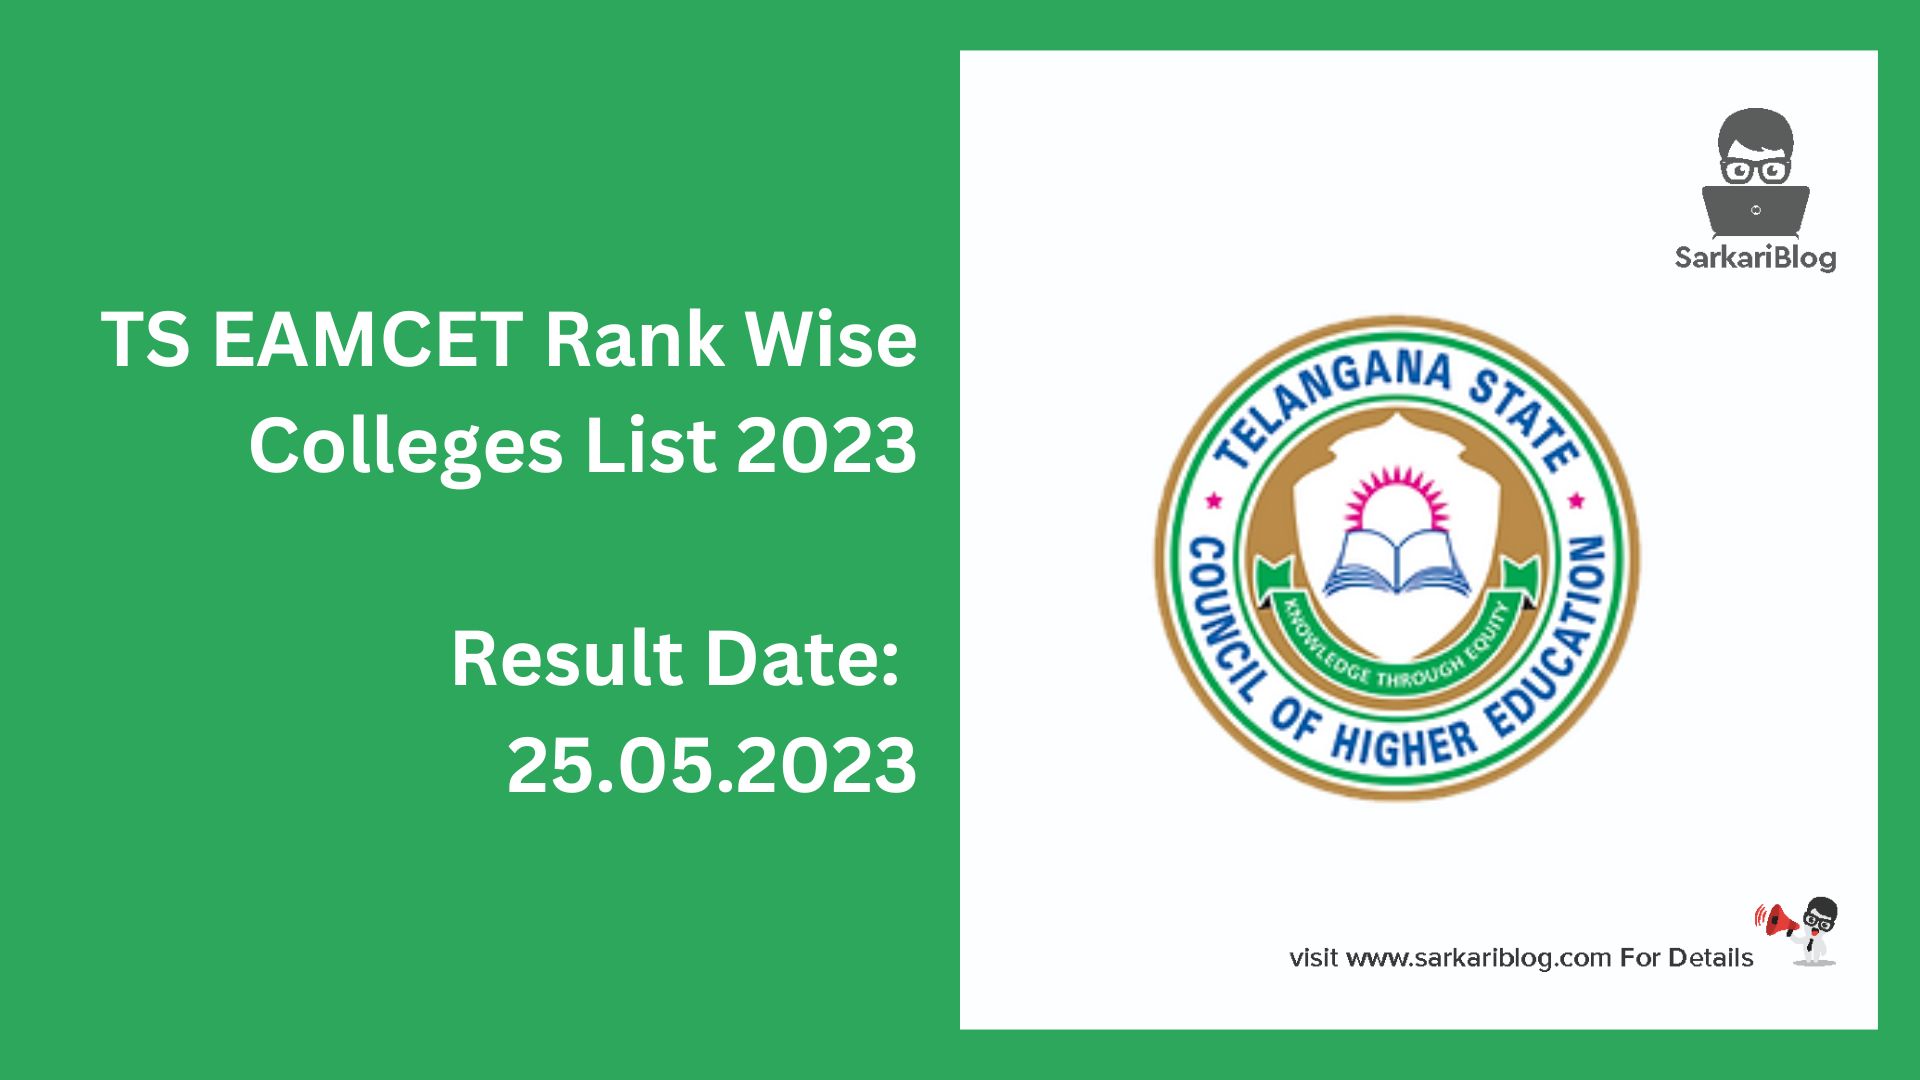 TS EAMCET Rank Wise Colleges List 2023